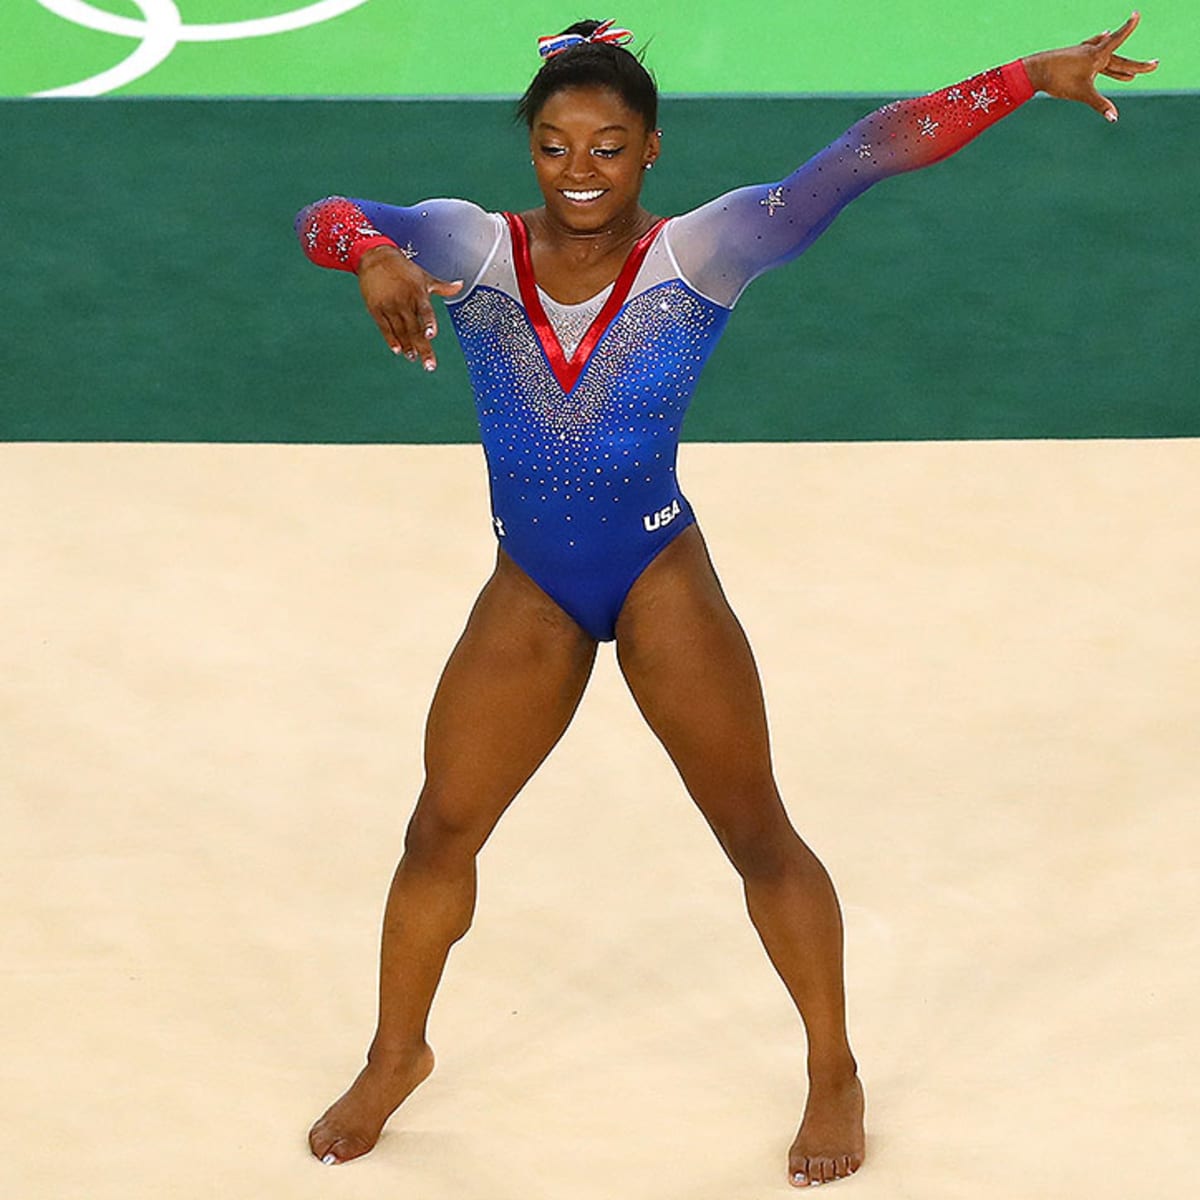 Olympics Gymnastics Live Results Updates From Rio 16 Sports Illustrated